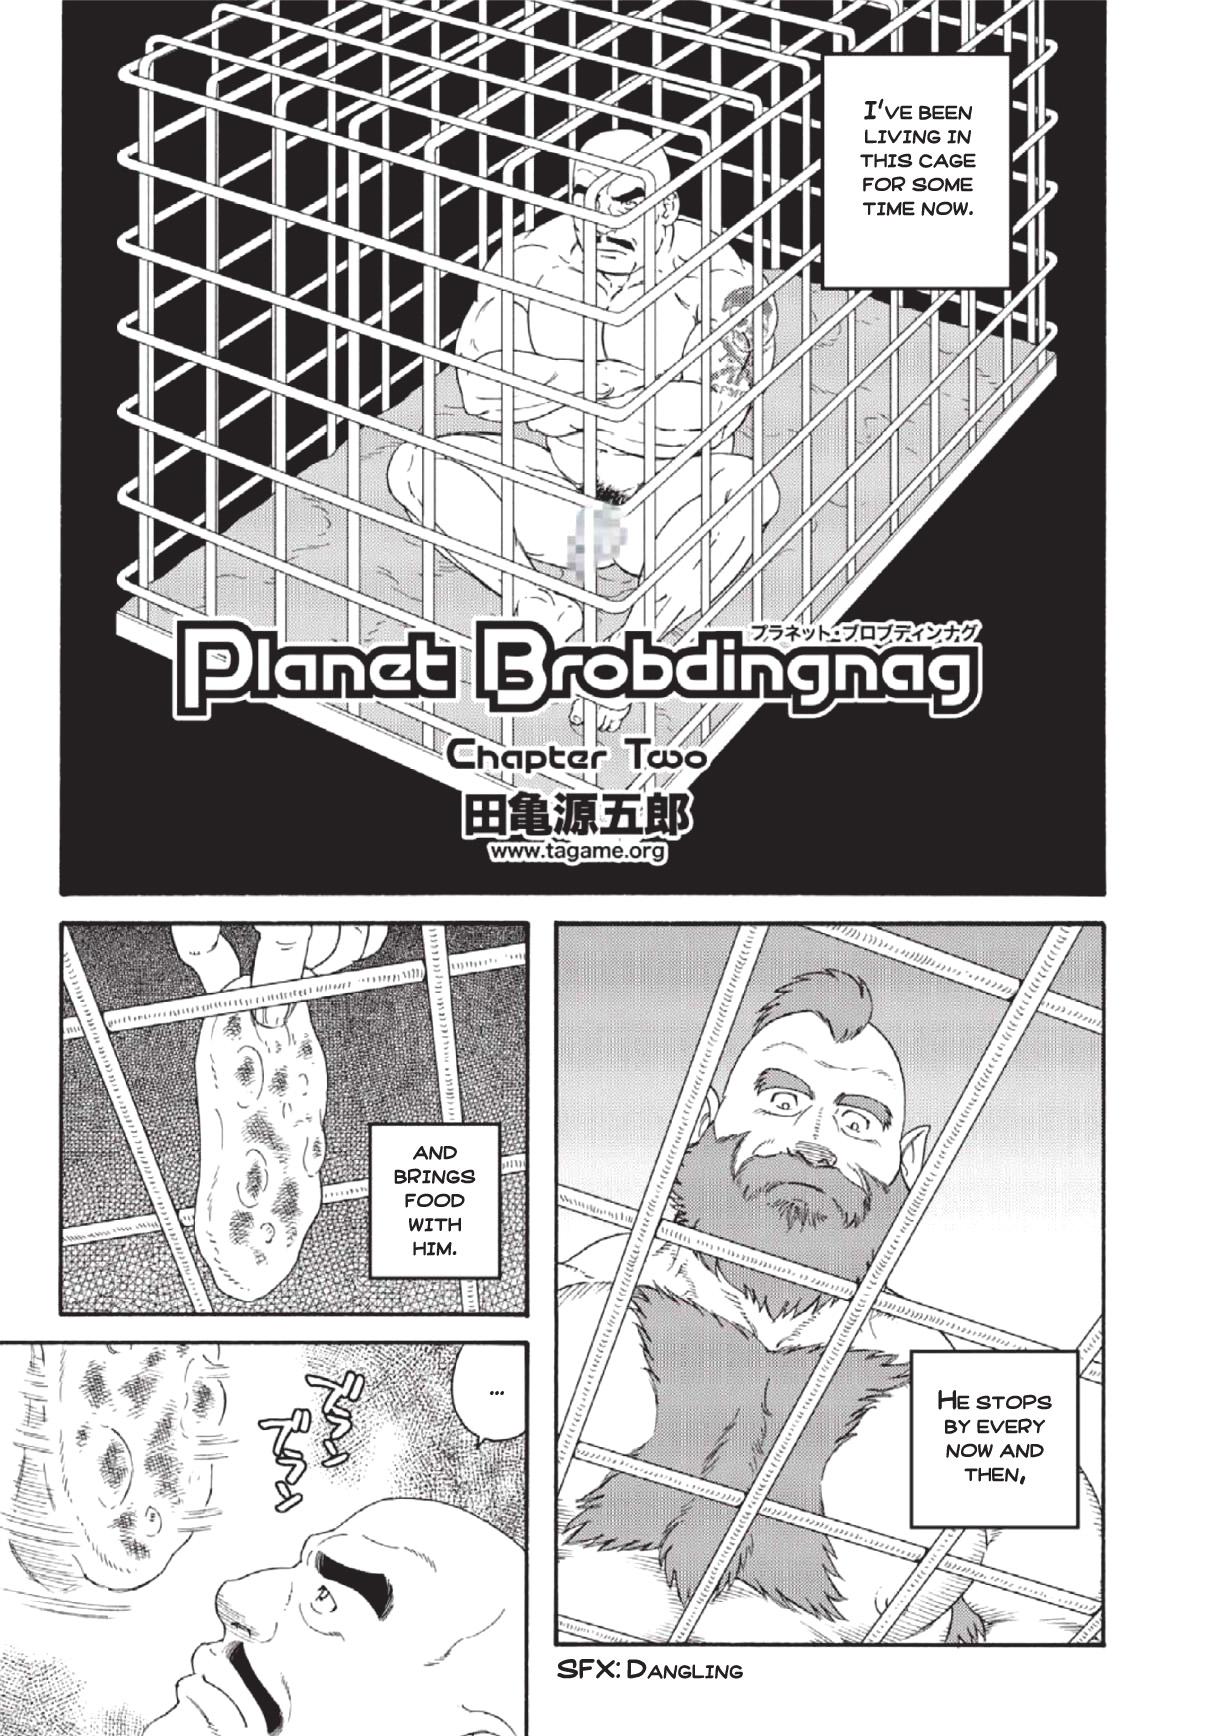 Oral Sex Planet Brobdingnag chapter 2 Gaystraight - Page 1